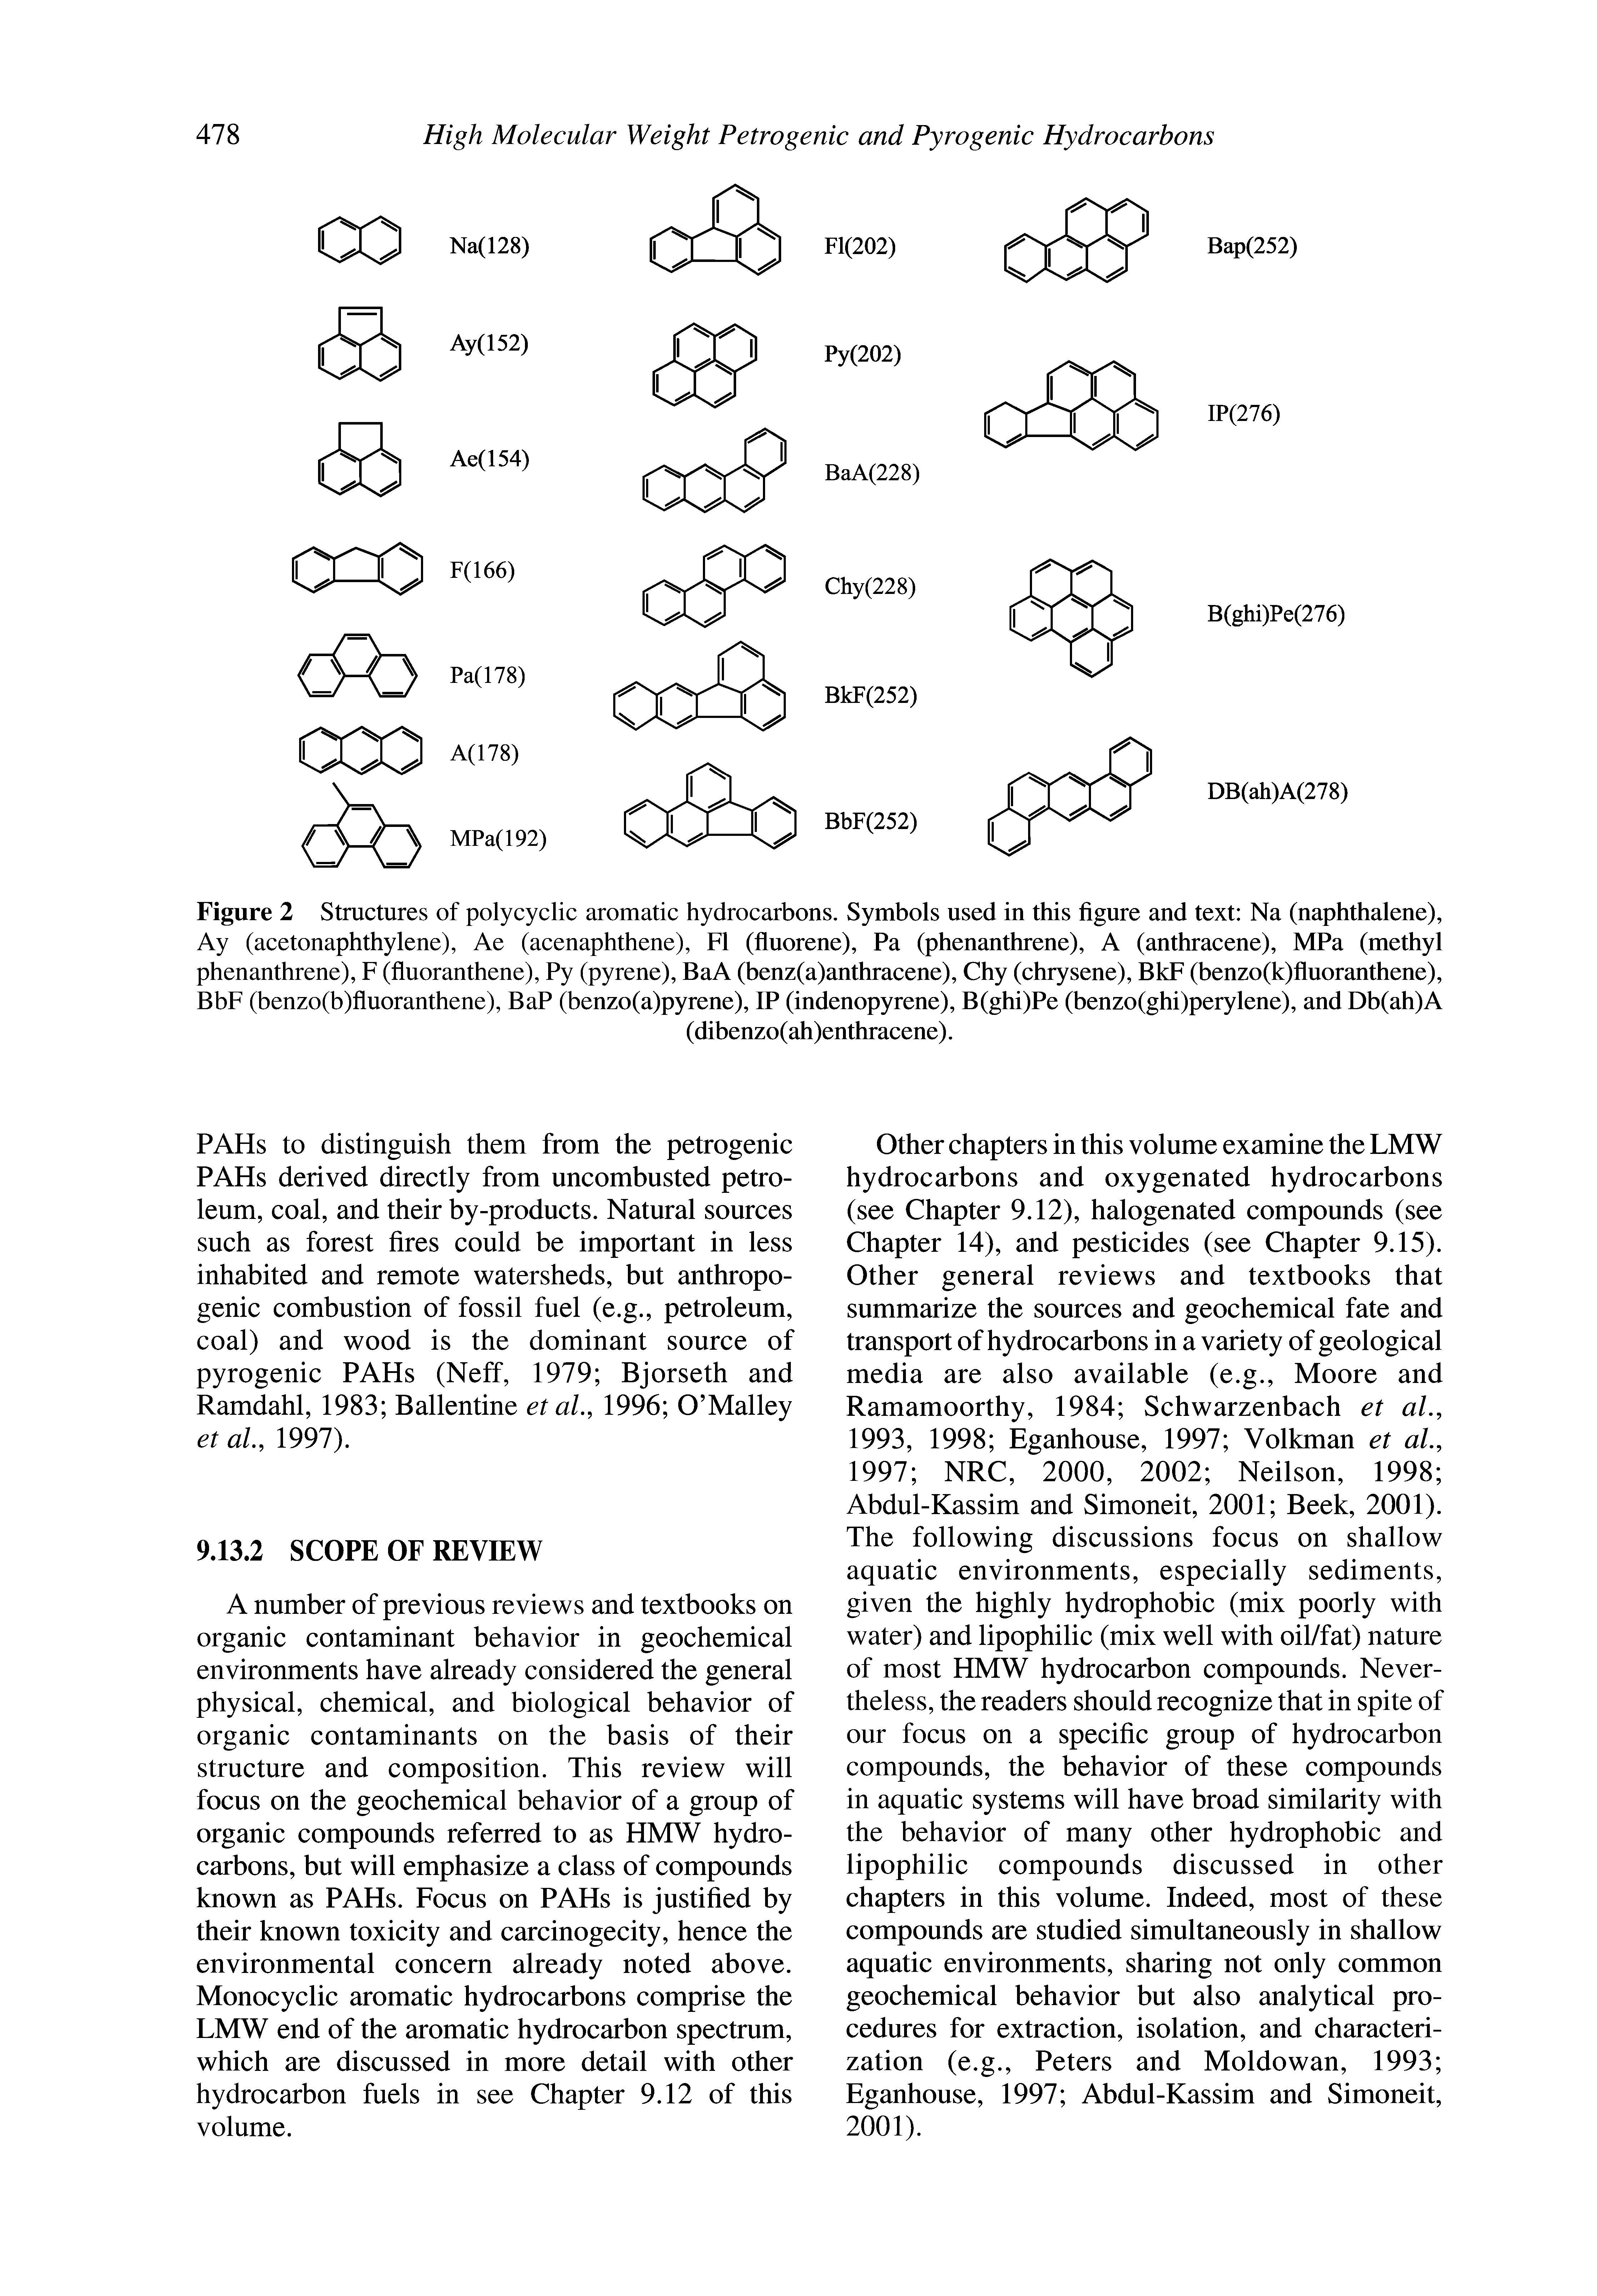 Figure 2 Structures of polycyclic aromatic hydrocarbons. Symbols used in this figure and text Na (naphthalene). Ay (acetonaphthylene), Ae (acenaphthene), FI (fluorene). Pa (phenanthrene), A (anthracene), MPa (methyl phenanthrene), F (fluoranthene), Py (pyrene), BaA (benz(a)anthracene), Chy (chrysene), BlcF (benzo(k)fluoranthene), BbF (benzo(b)fluoranthene), BaP (benzo(a)pyrene), IP (indenopyrene), B(ghi)Pe (benzo(ghi)perylene), and Db(ah)A...